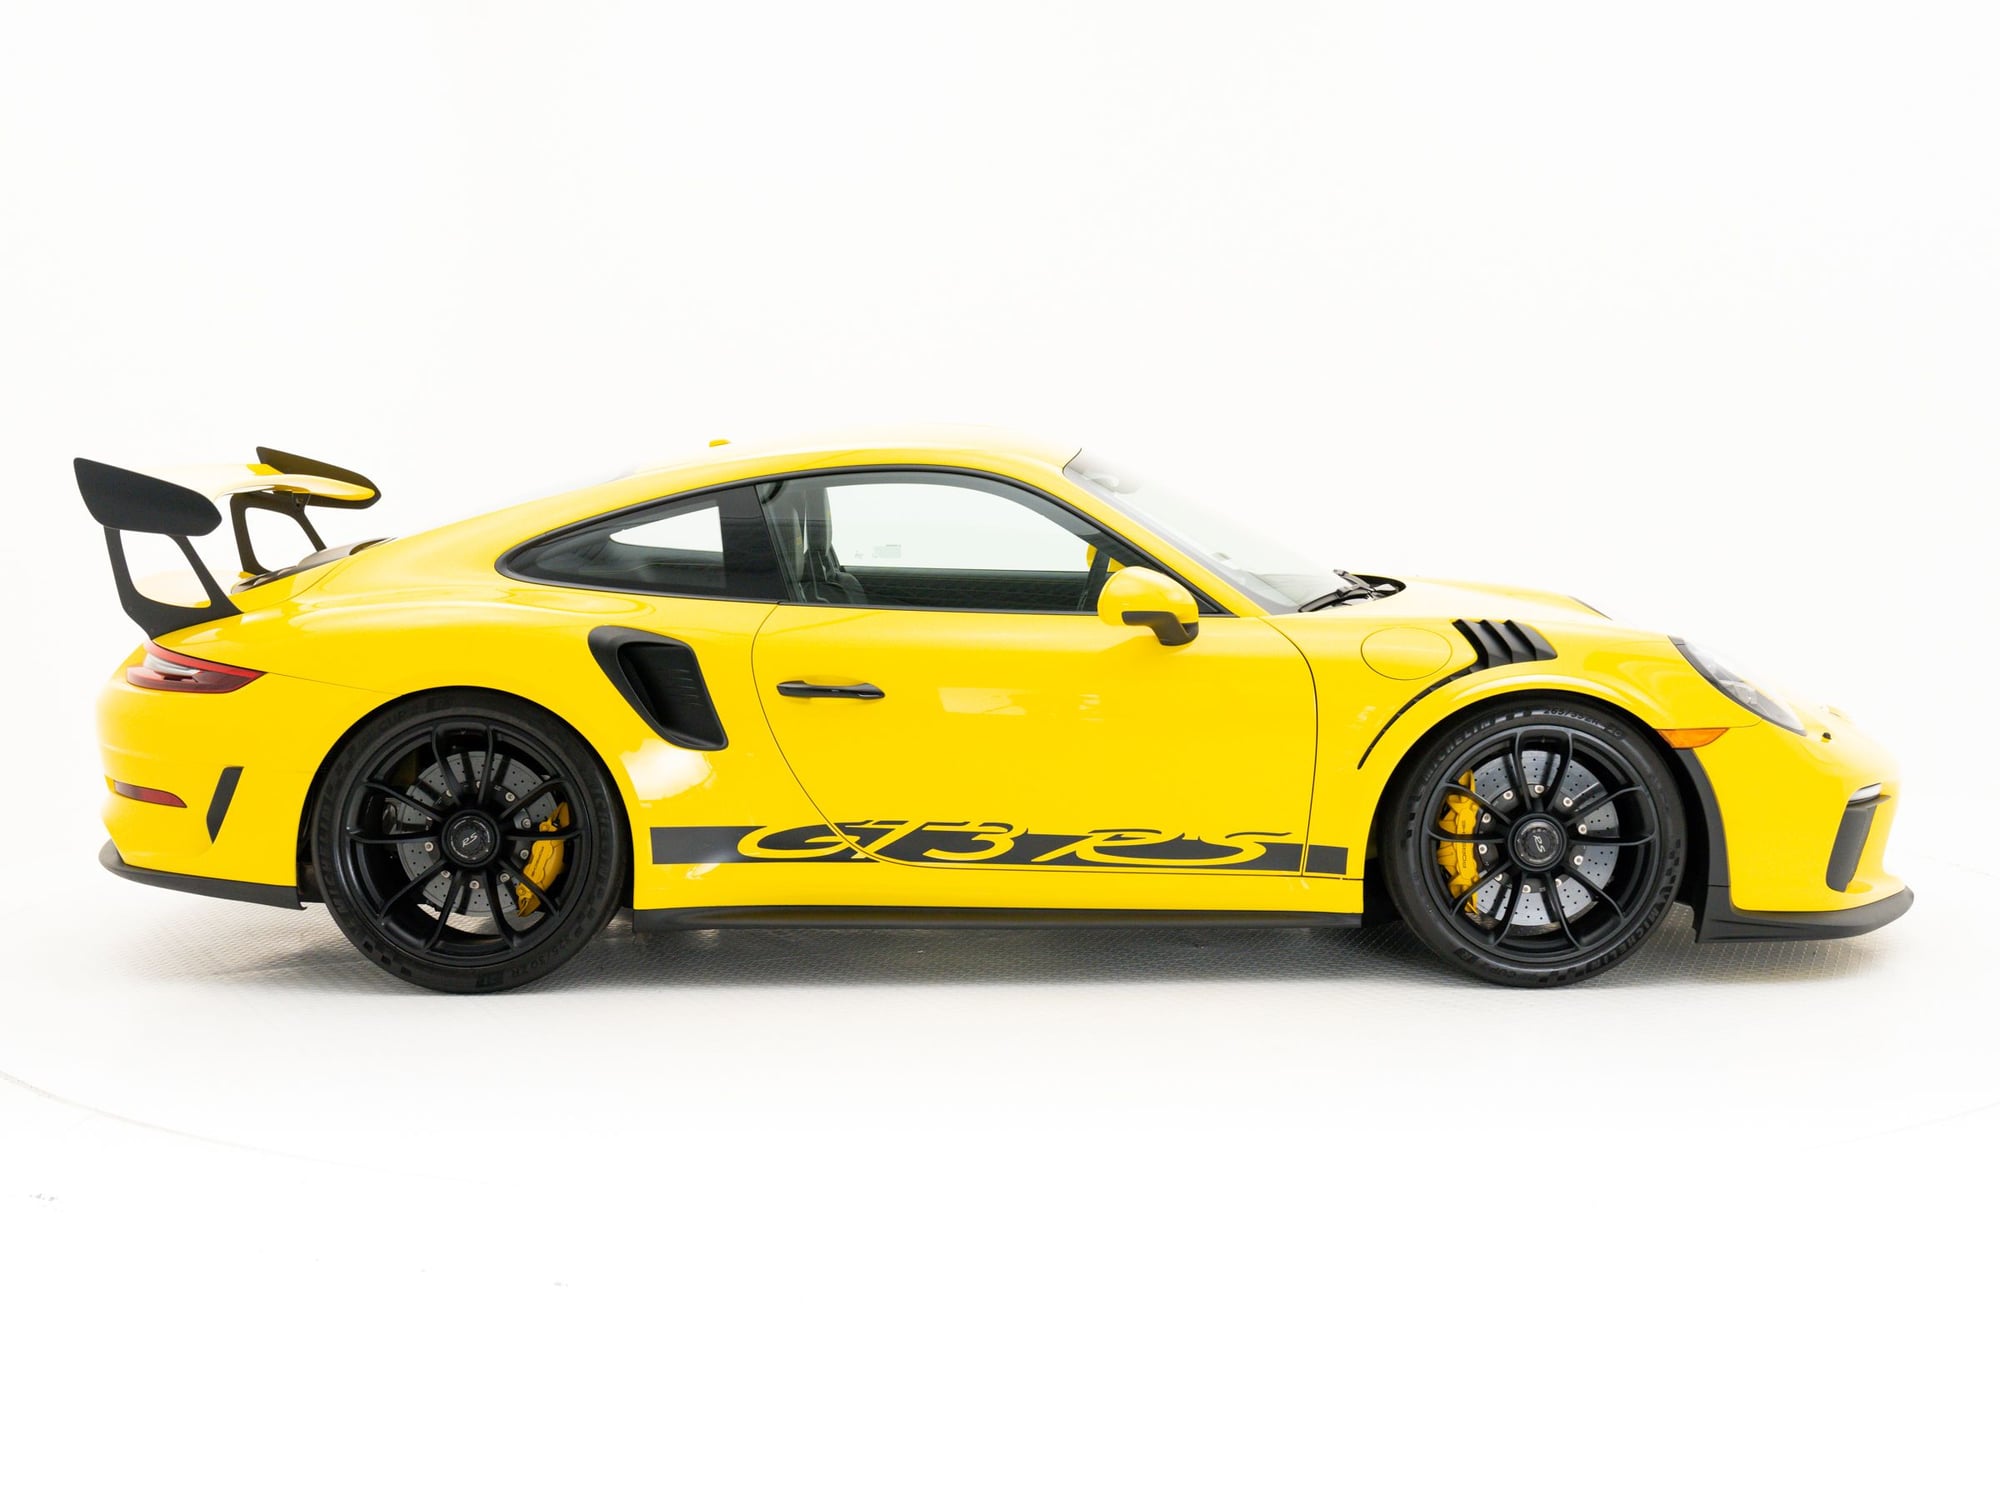 2019 Porsche GT3 - Dealer Inventory: Certified Pre-Owned 2019 Porsche 911 GT3 RS - Used - VIN WP0AF2A94KS165441 - 6,200 Miles - 6 cyl - 2WD - Automatic - Coupe - Yellow - Beaverton, OR 97005, United States